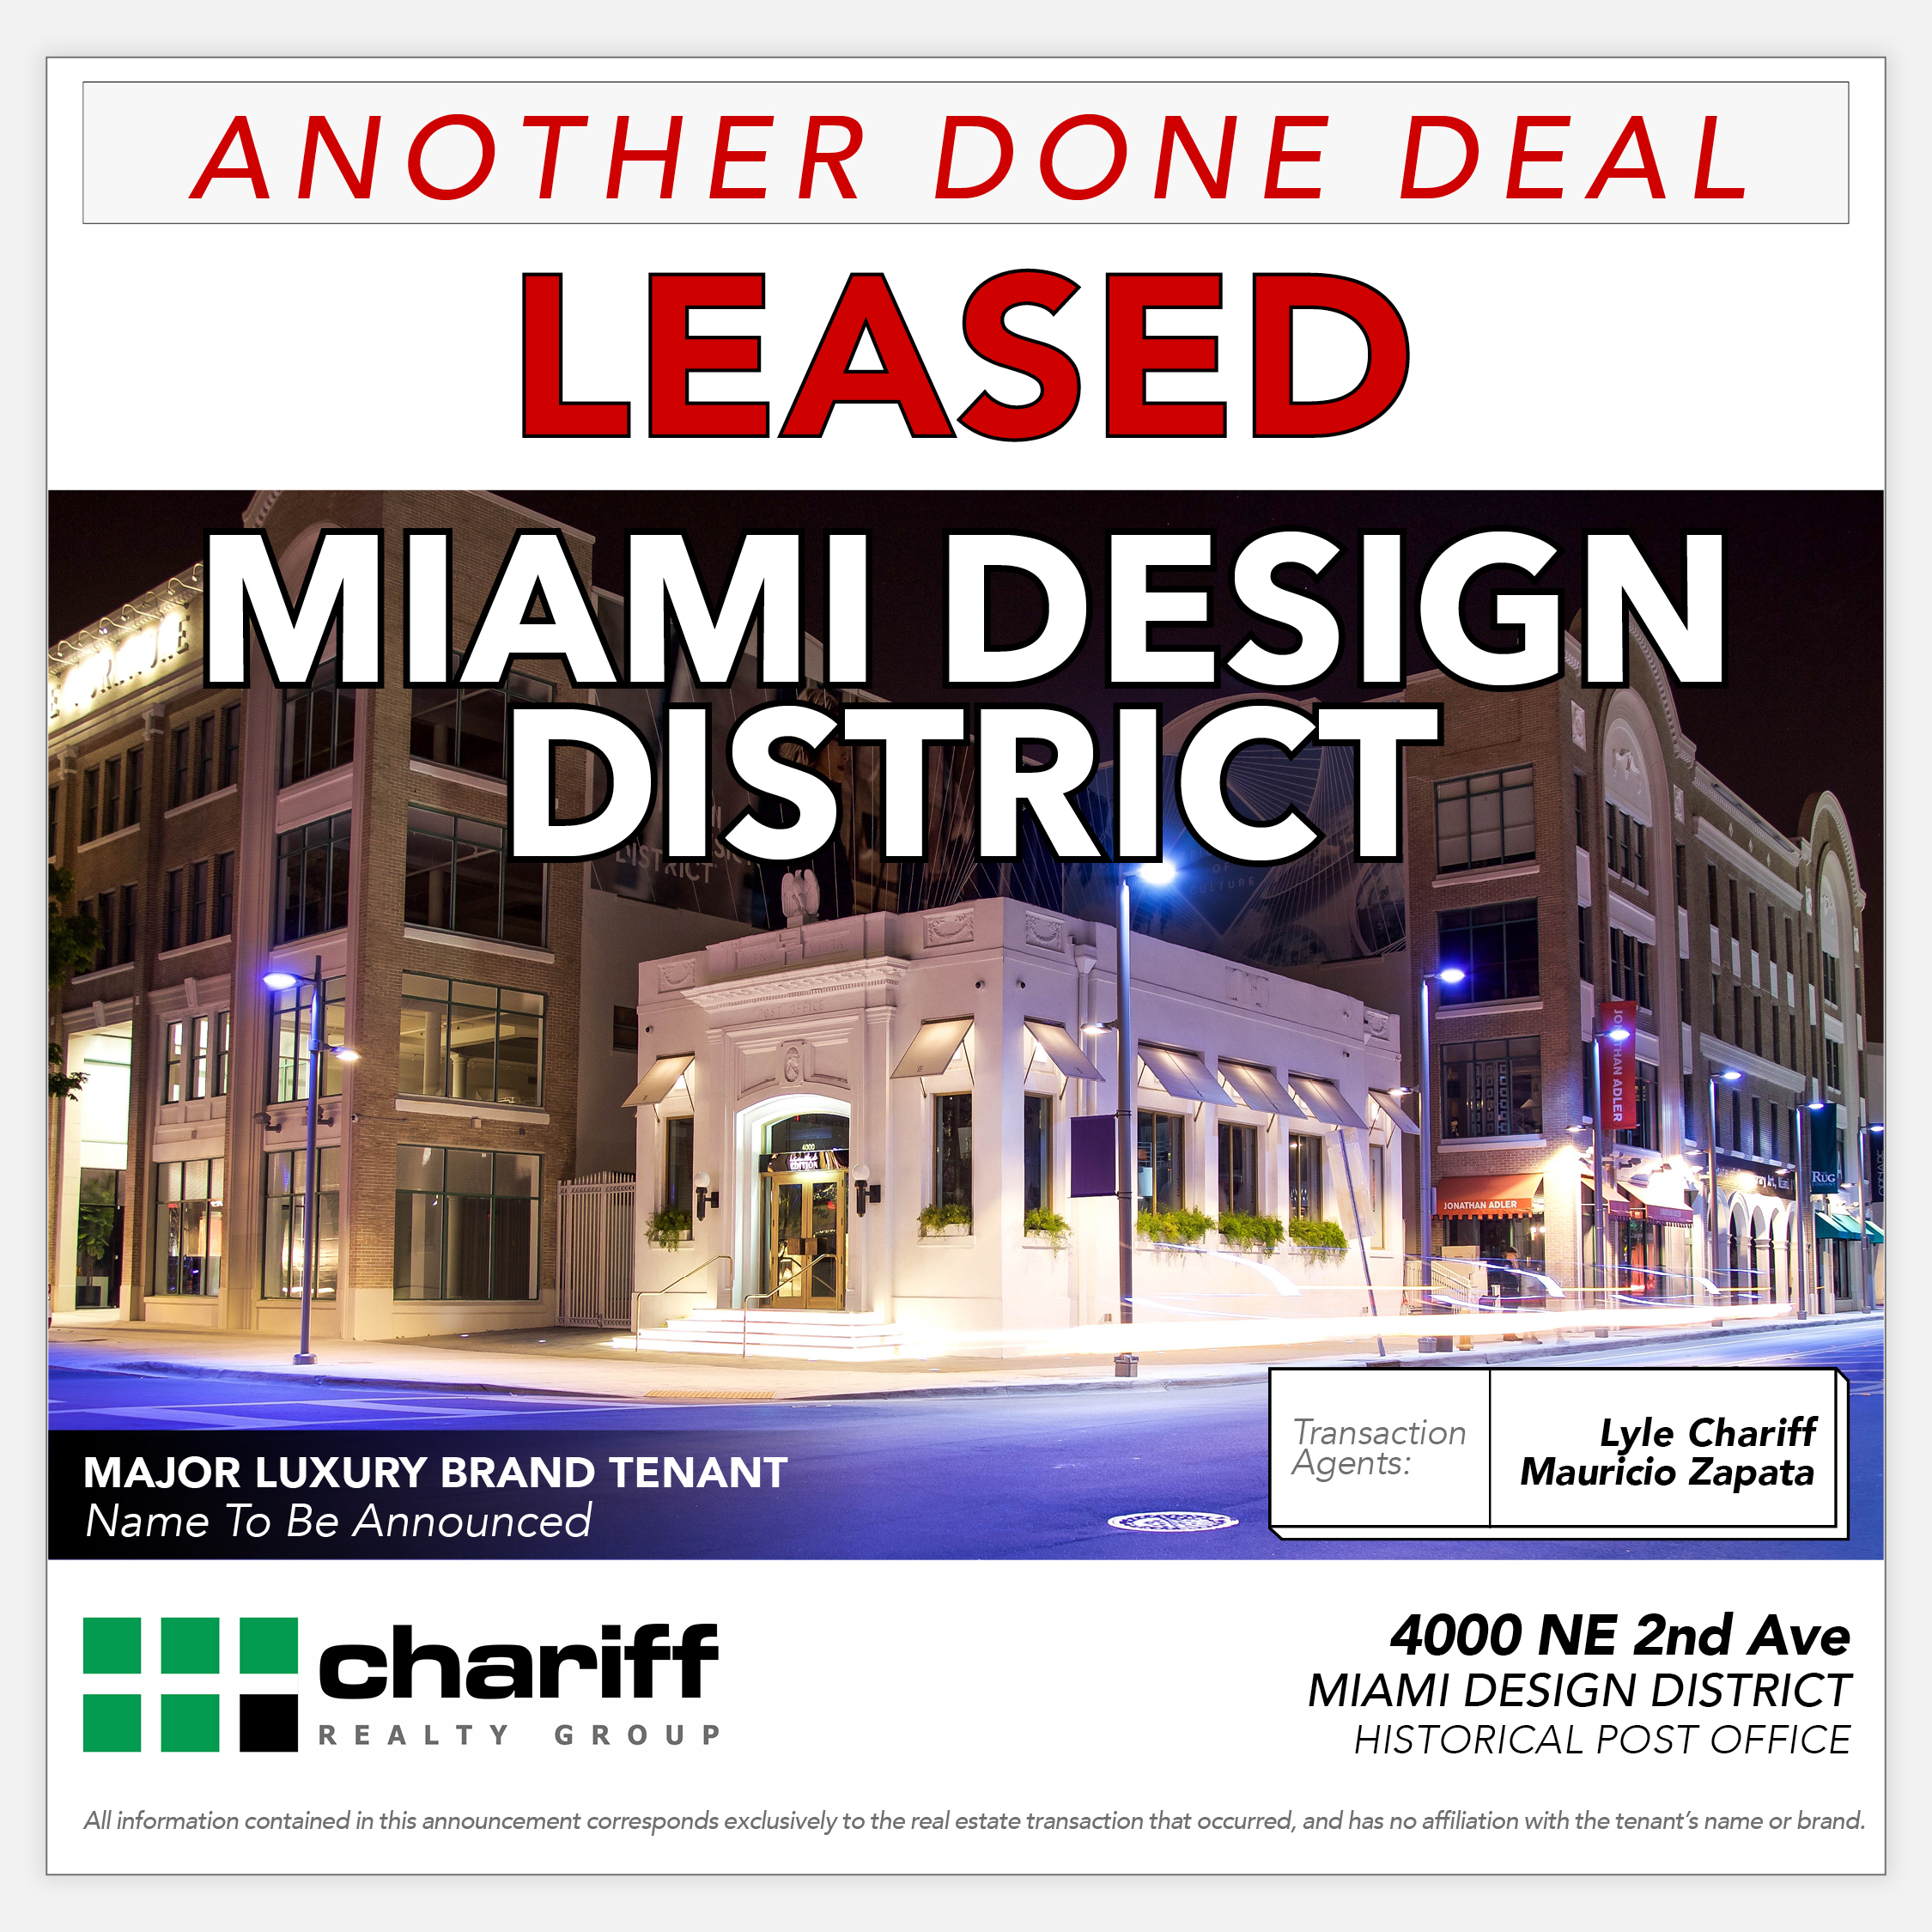 4000 NE 2nd Ave - Another Done Deal - Leased -Miami Design District Miami-Florida-33137-Chariff Realty Group